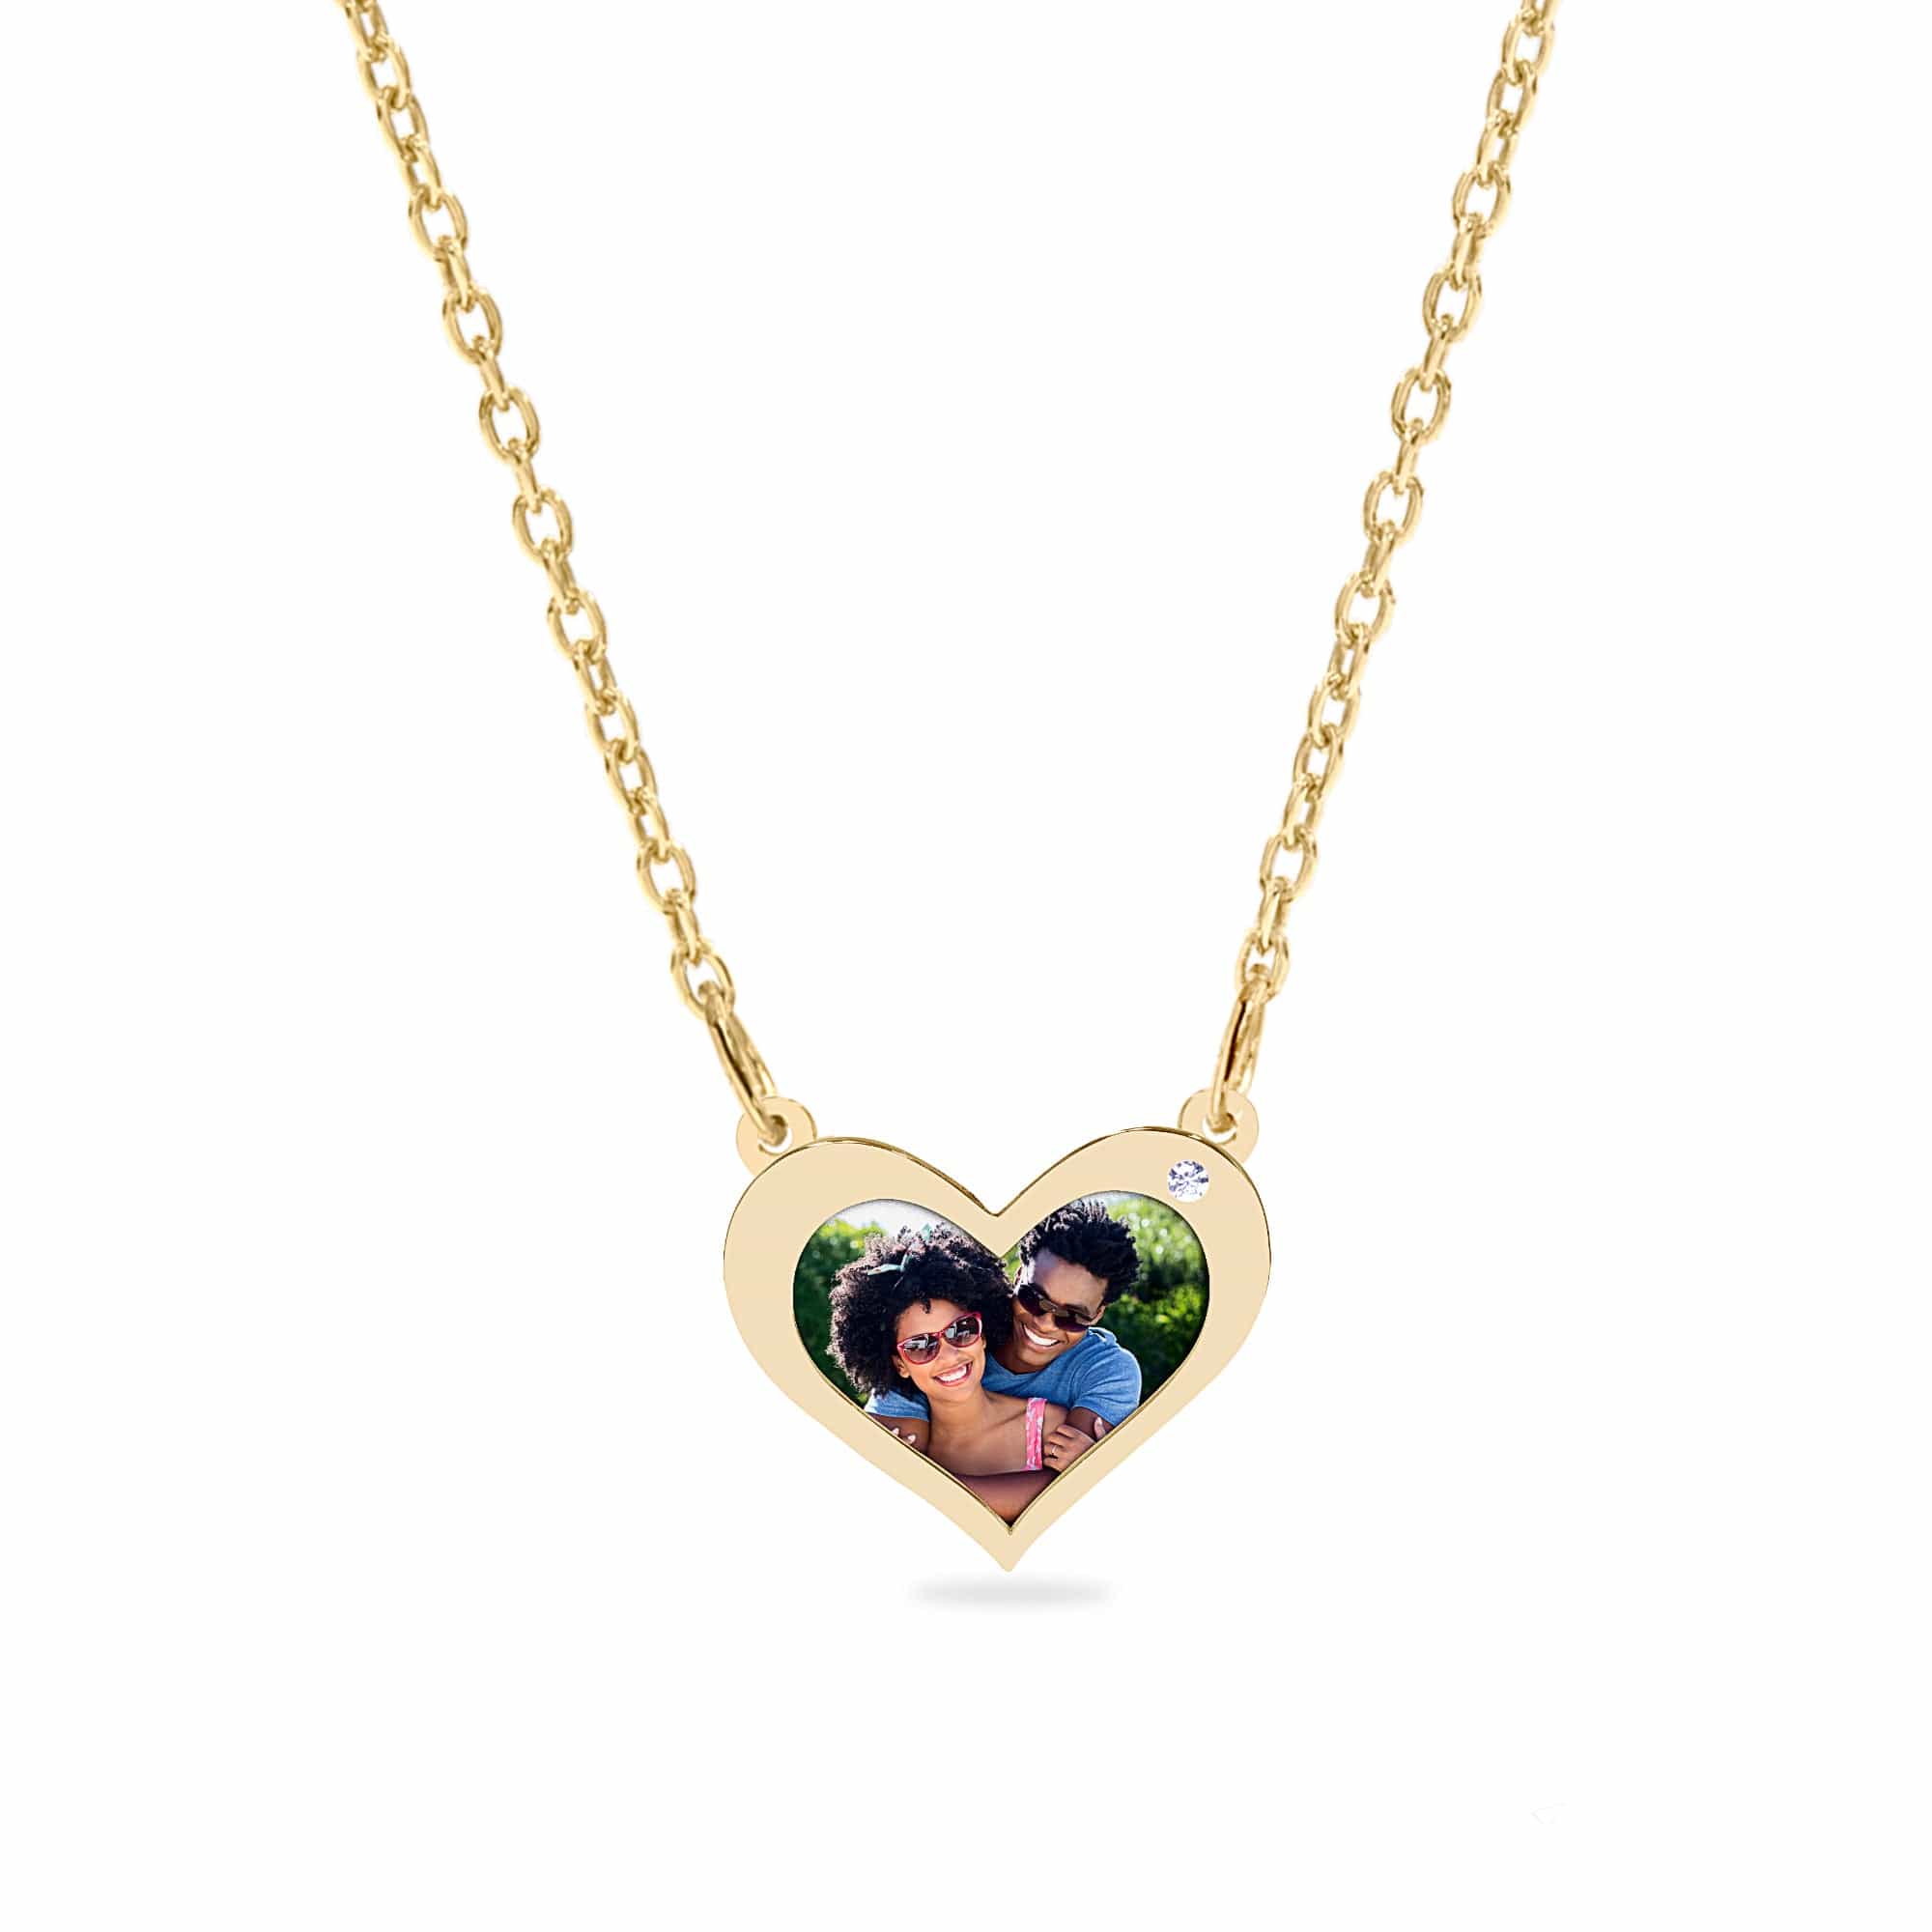 14k Gold Over Sterling Silver / Link Chain Copy of Heart Shaped Photo Pendant With Zirconia